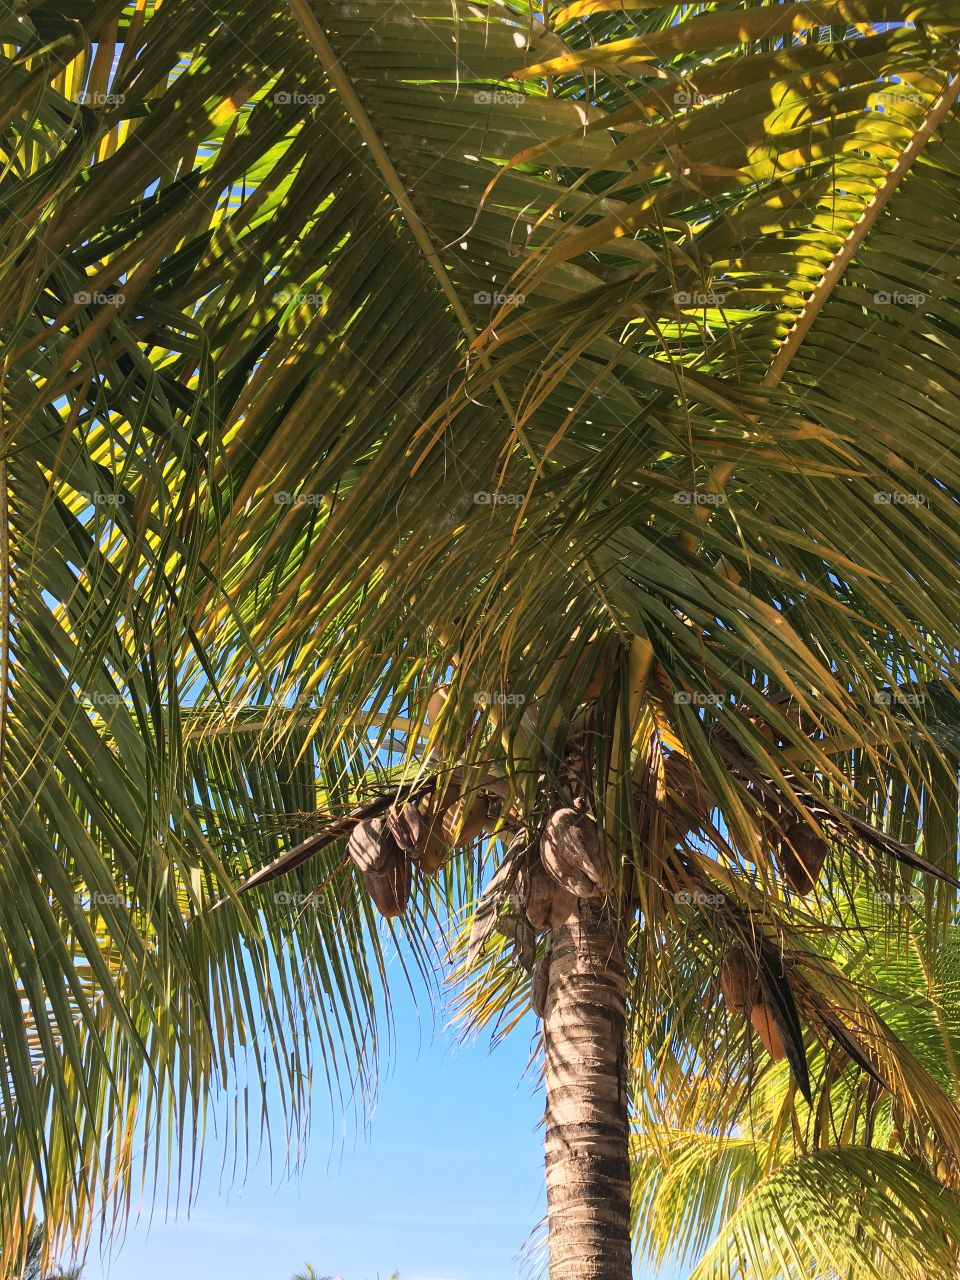 Coconuts on the tree